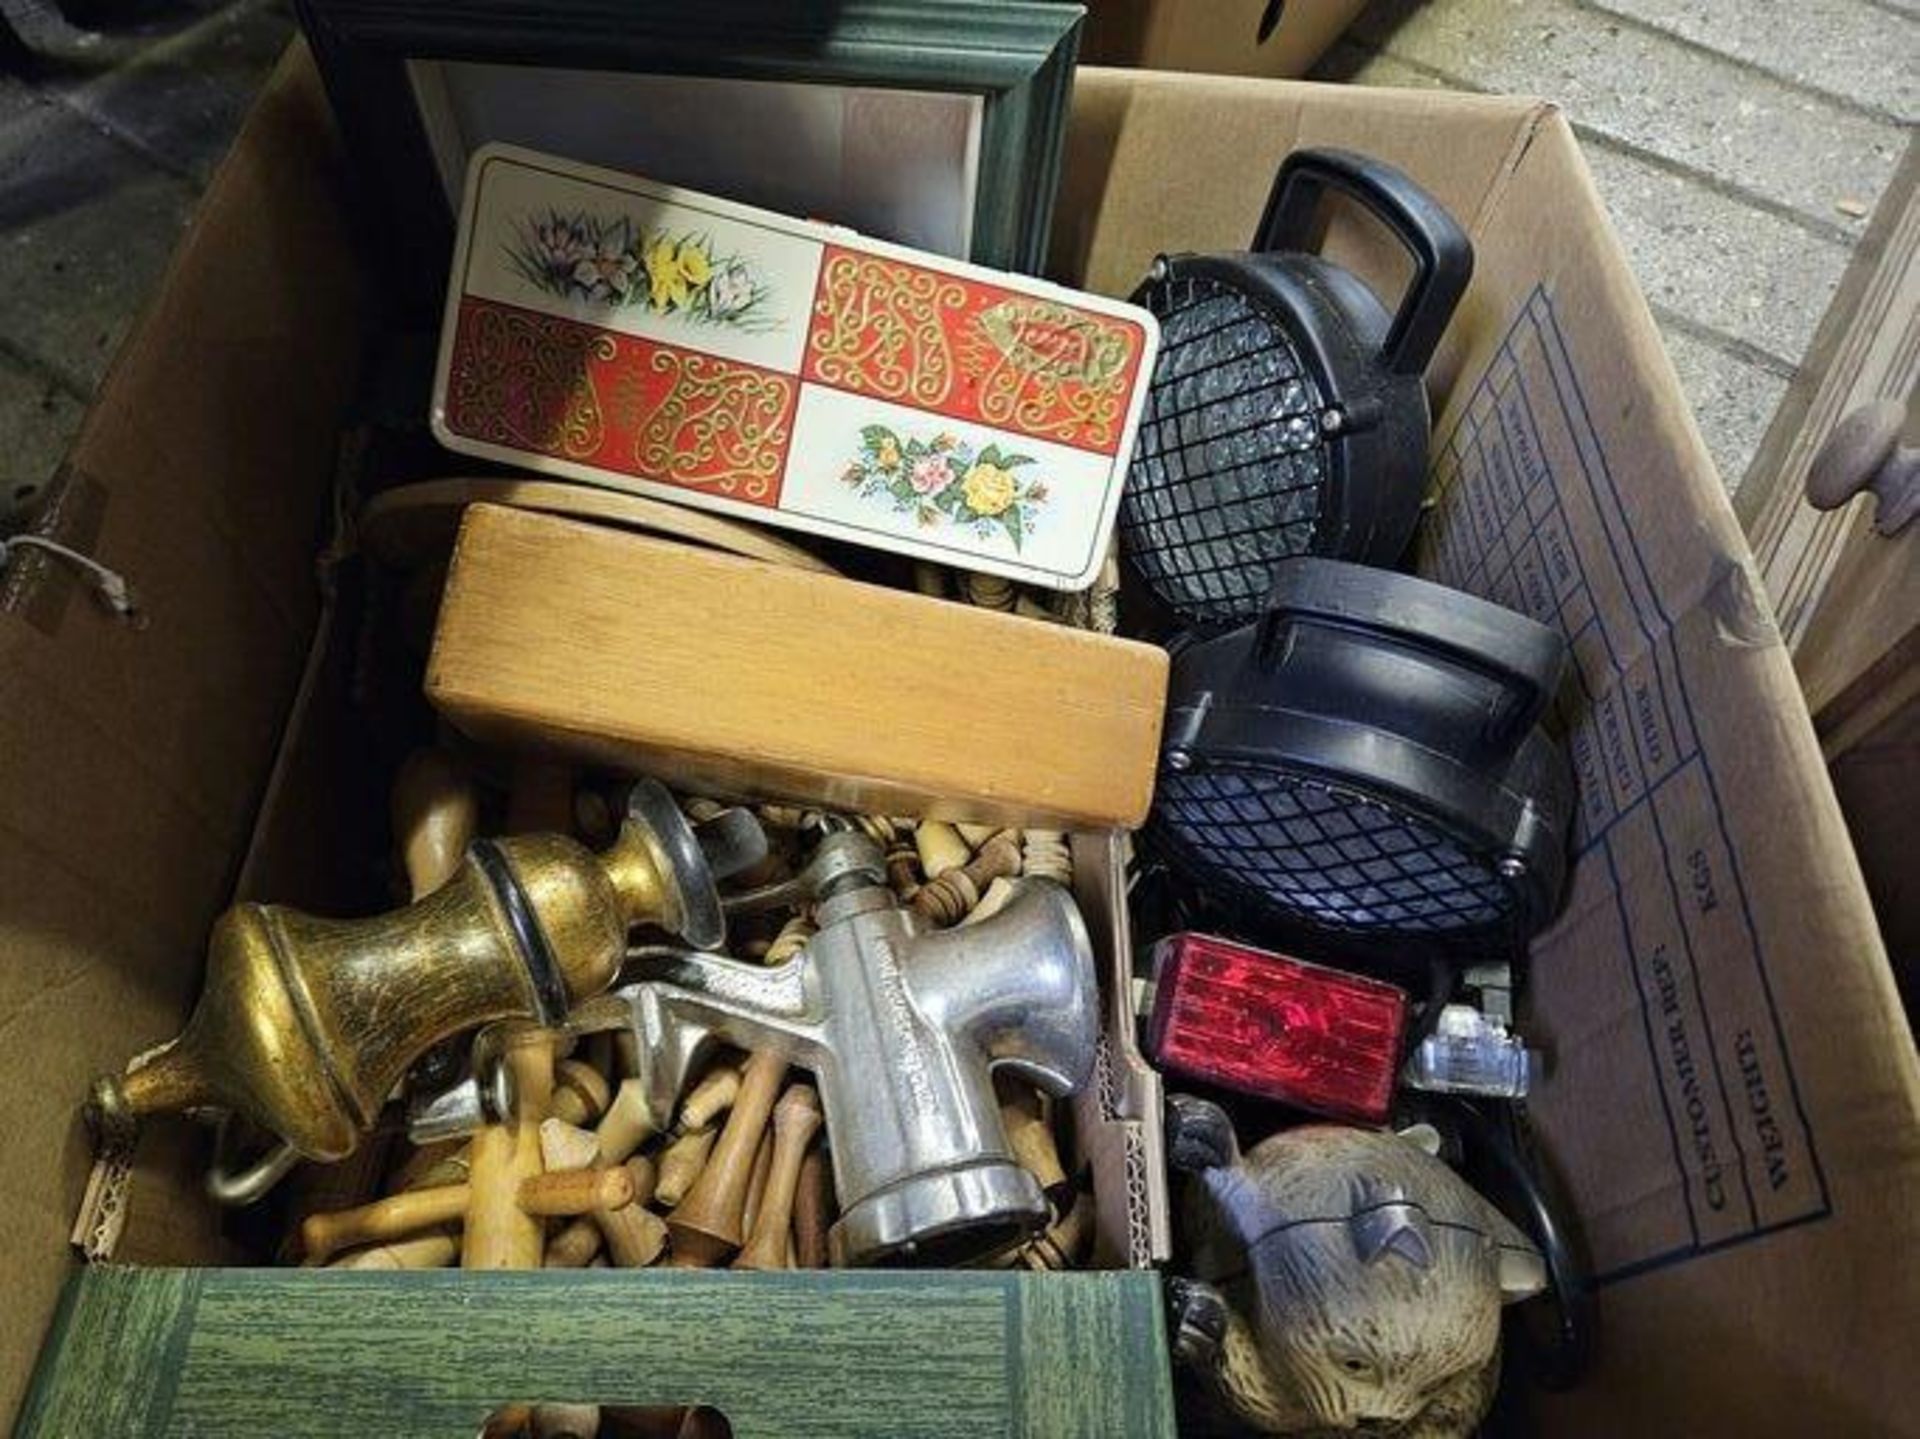 2 Boxes Including Assorted CD's, Lamps, Old Mincer Etc - Image 2 of 2